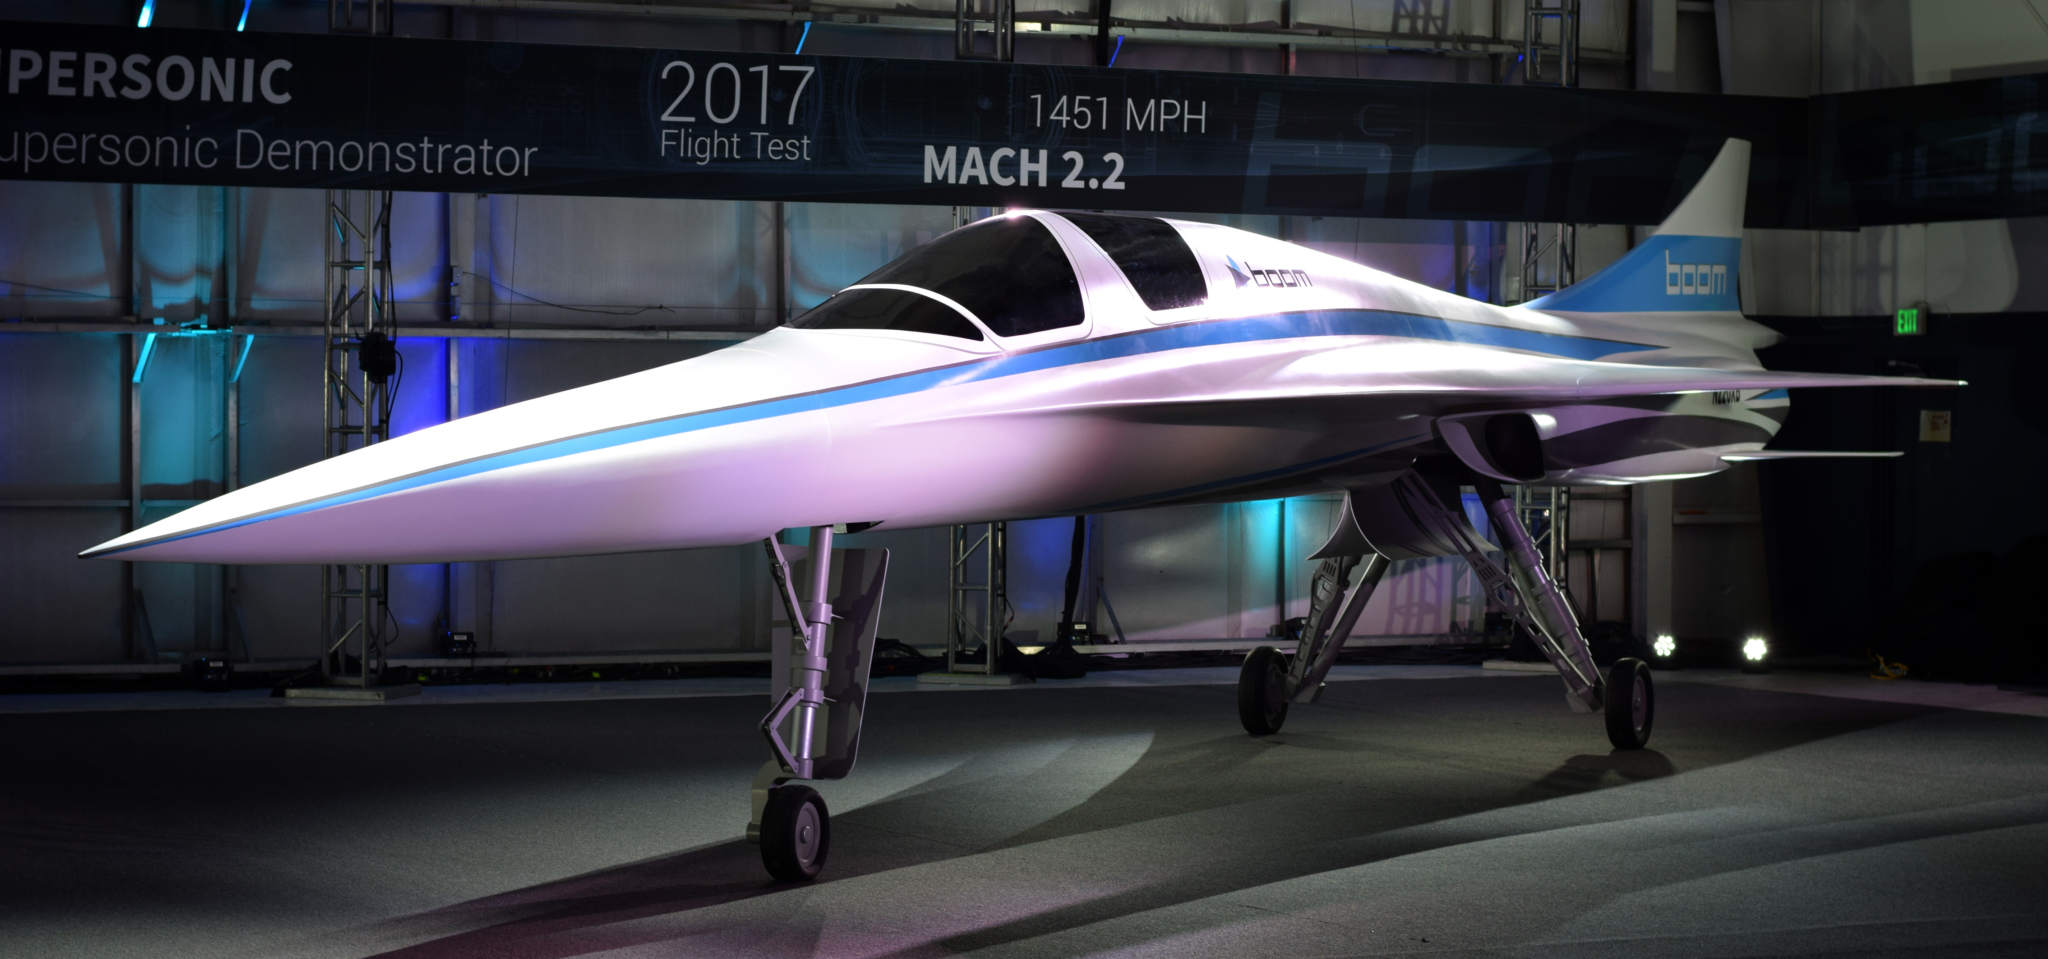 Boom's XB-1 supersonic demonstrator aircraft. Image via Business Wire.